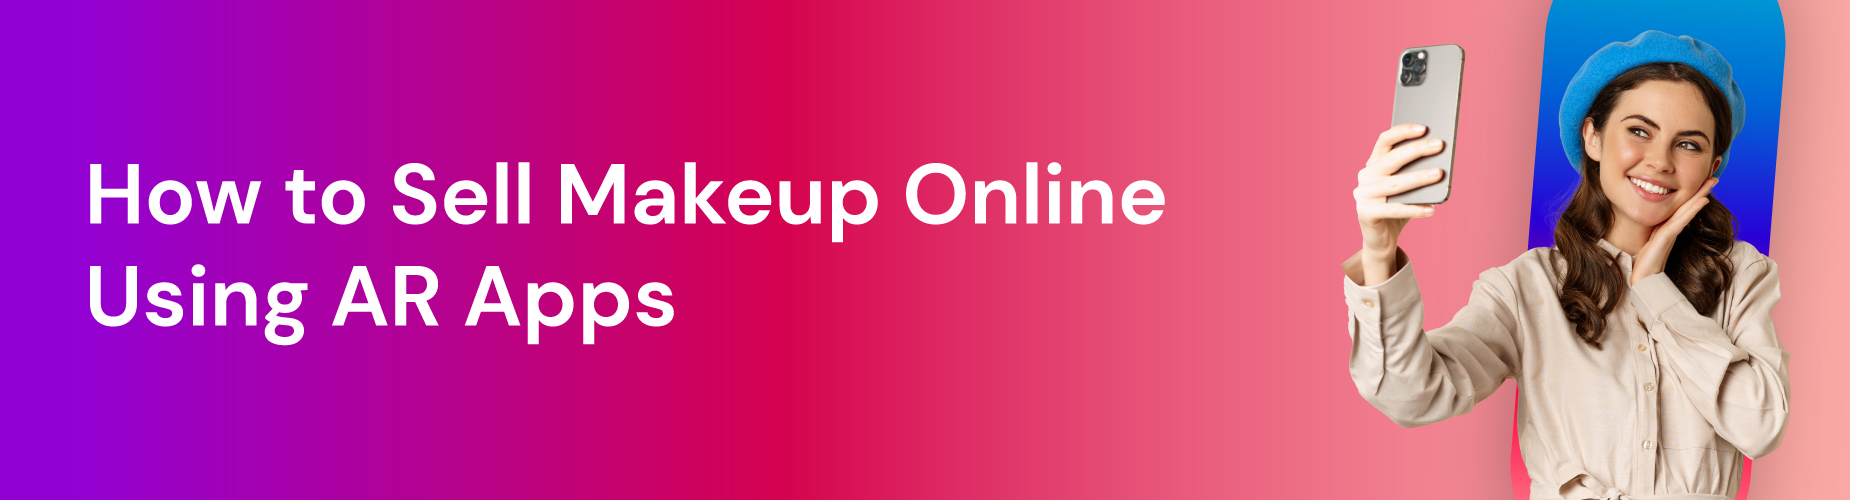 how to sell makeup online